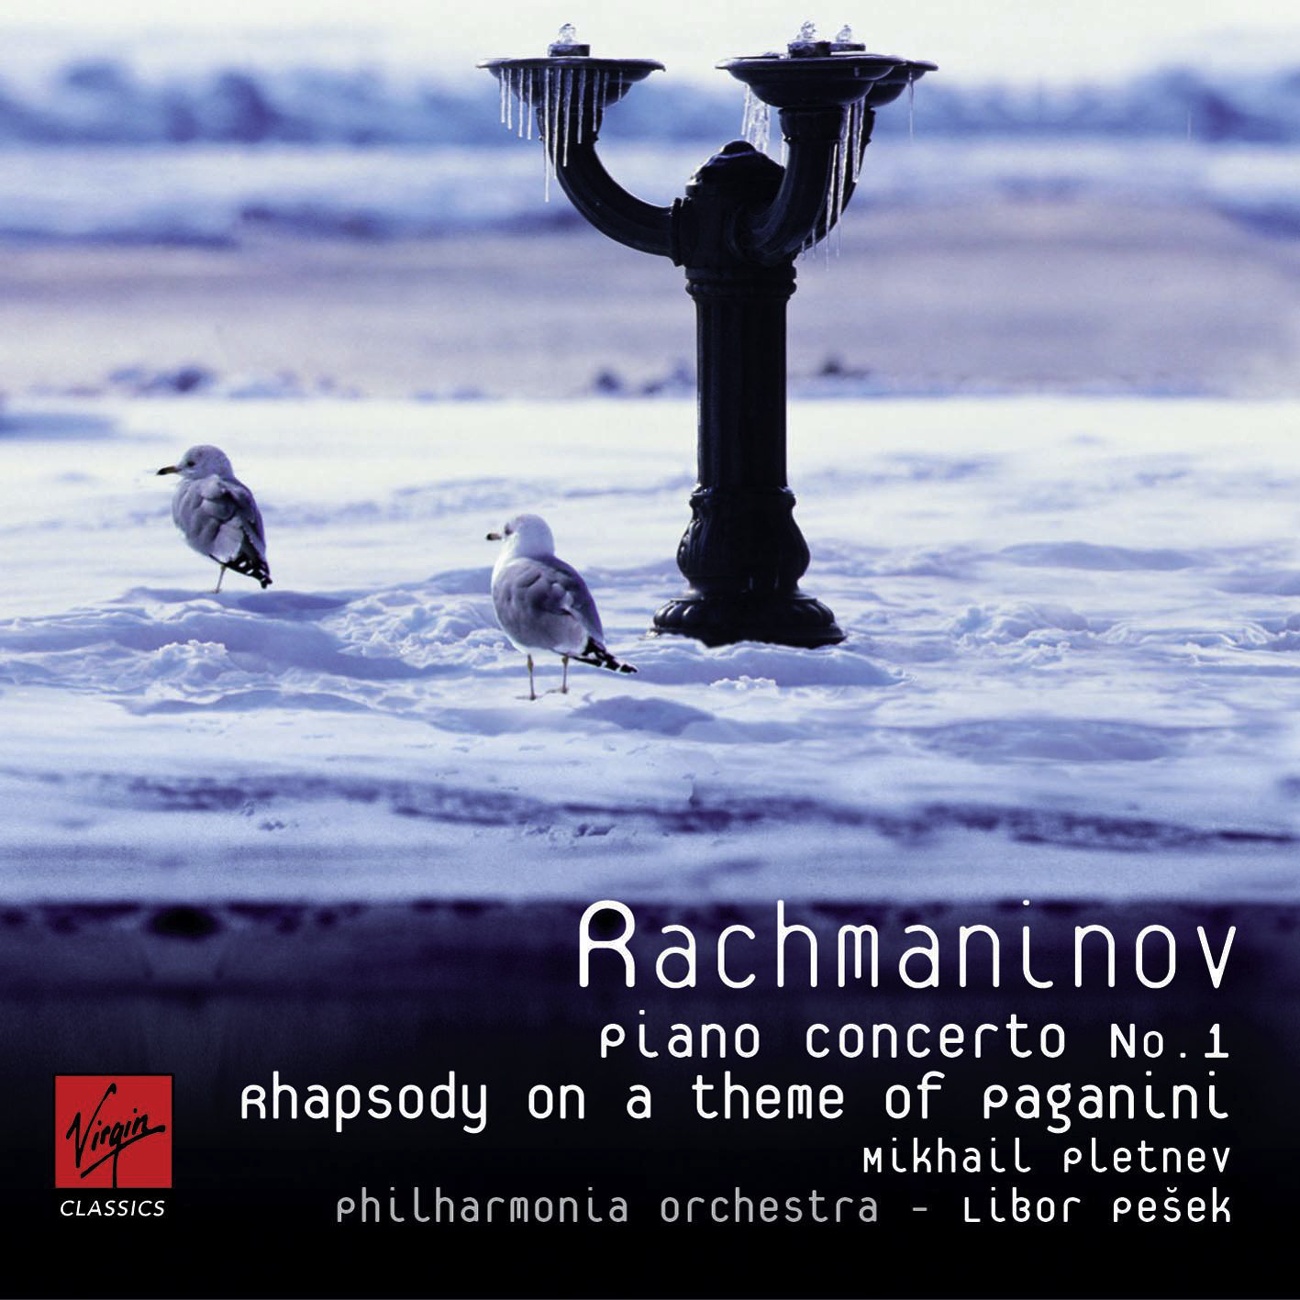 Rhapsody on a Theme of Paganini: Variation XIII - Allegro